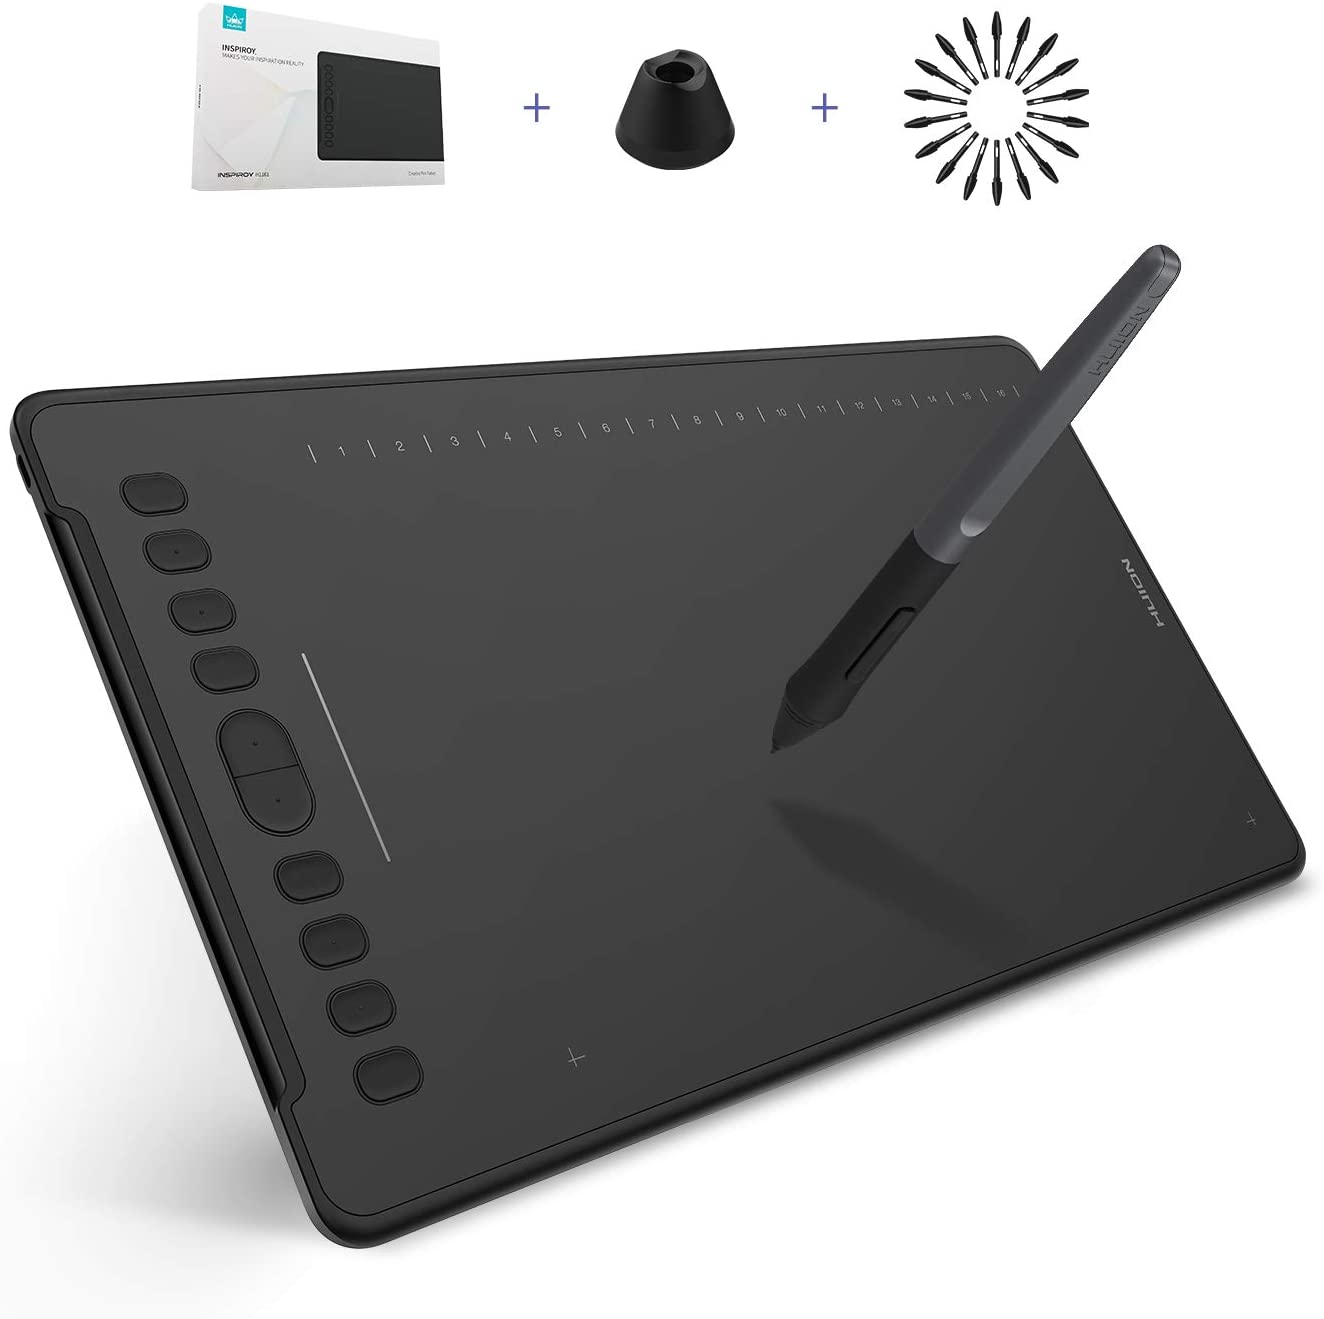 HUION Inspiroy H1161 specifications